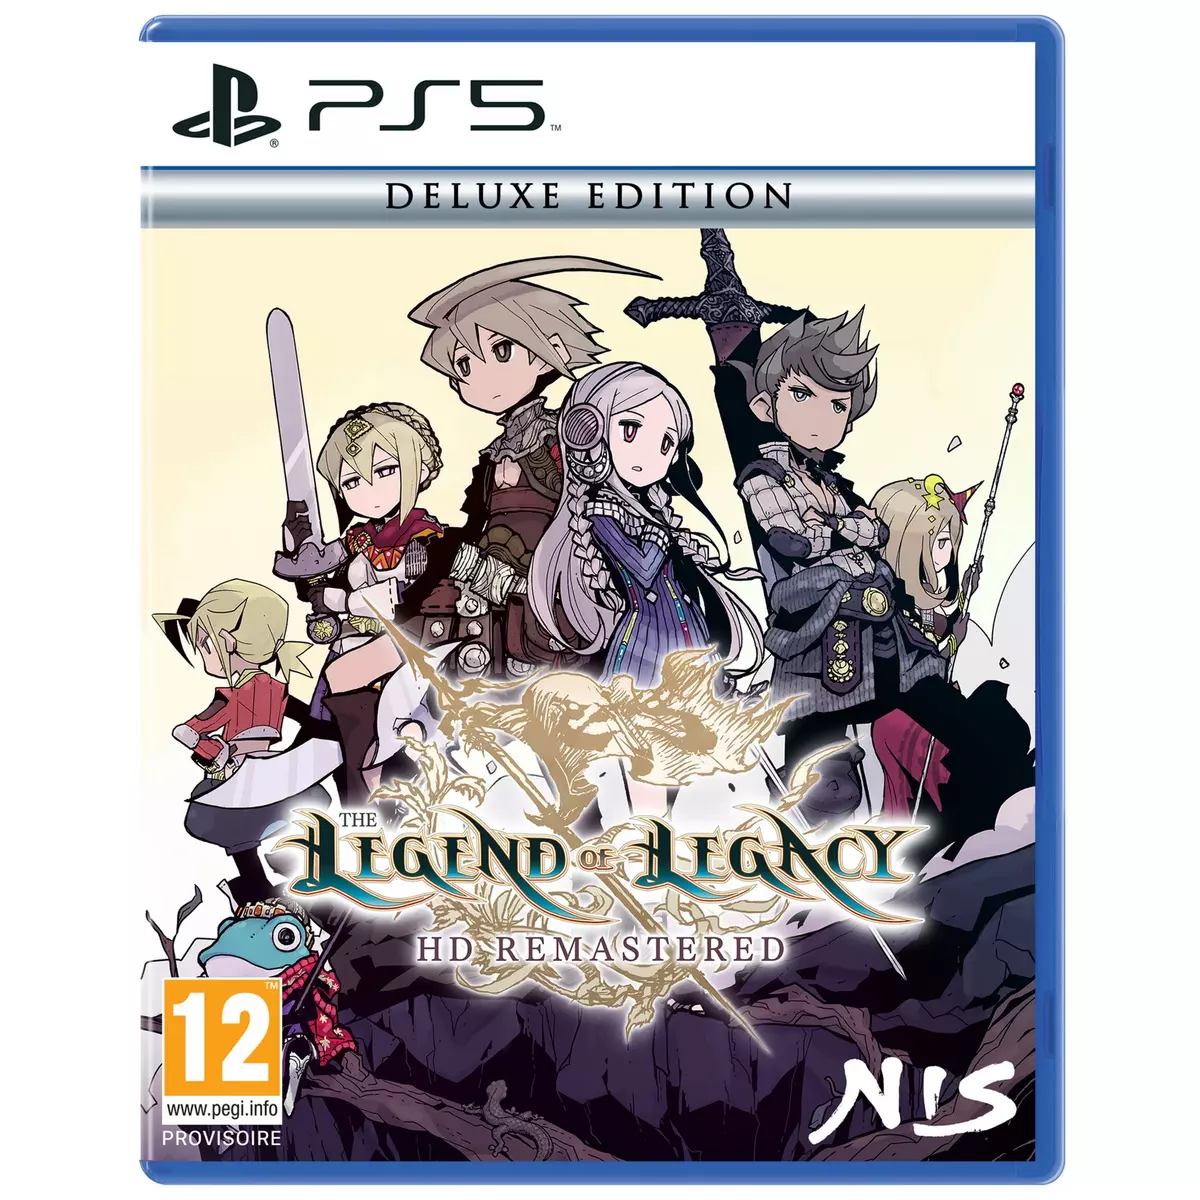 The Legend of Legacy HD Remastered - Deluxe Edition PS5